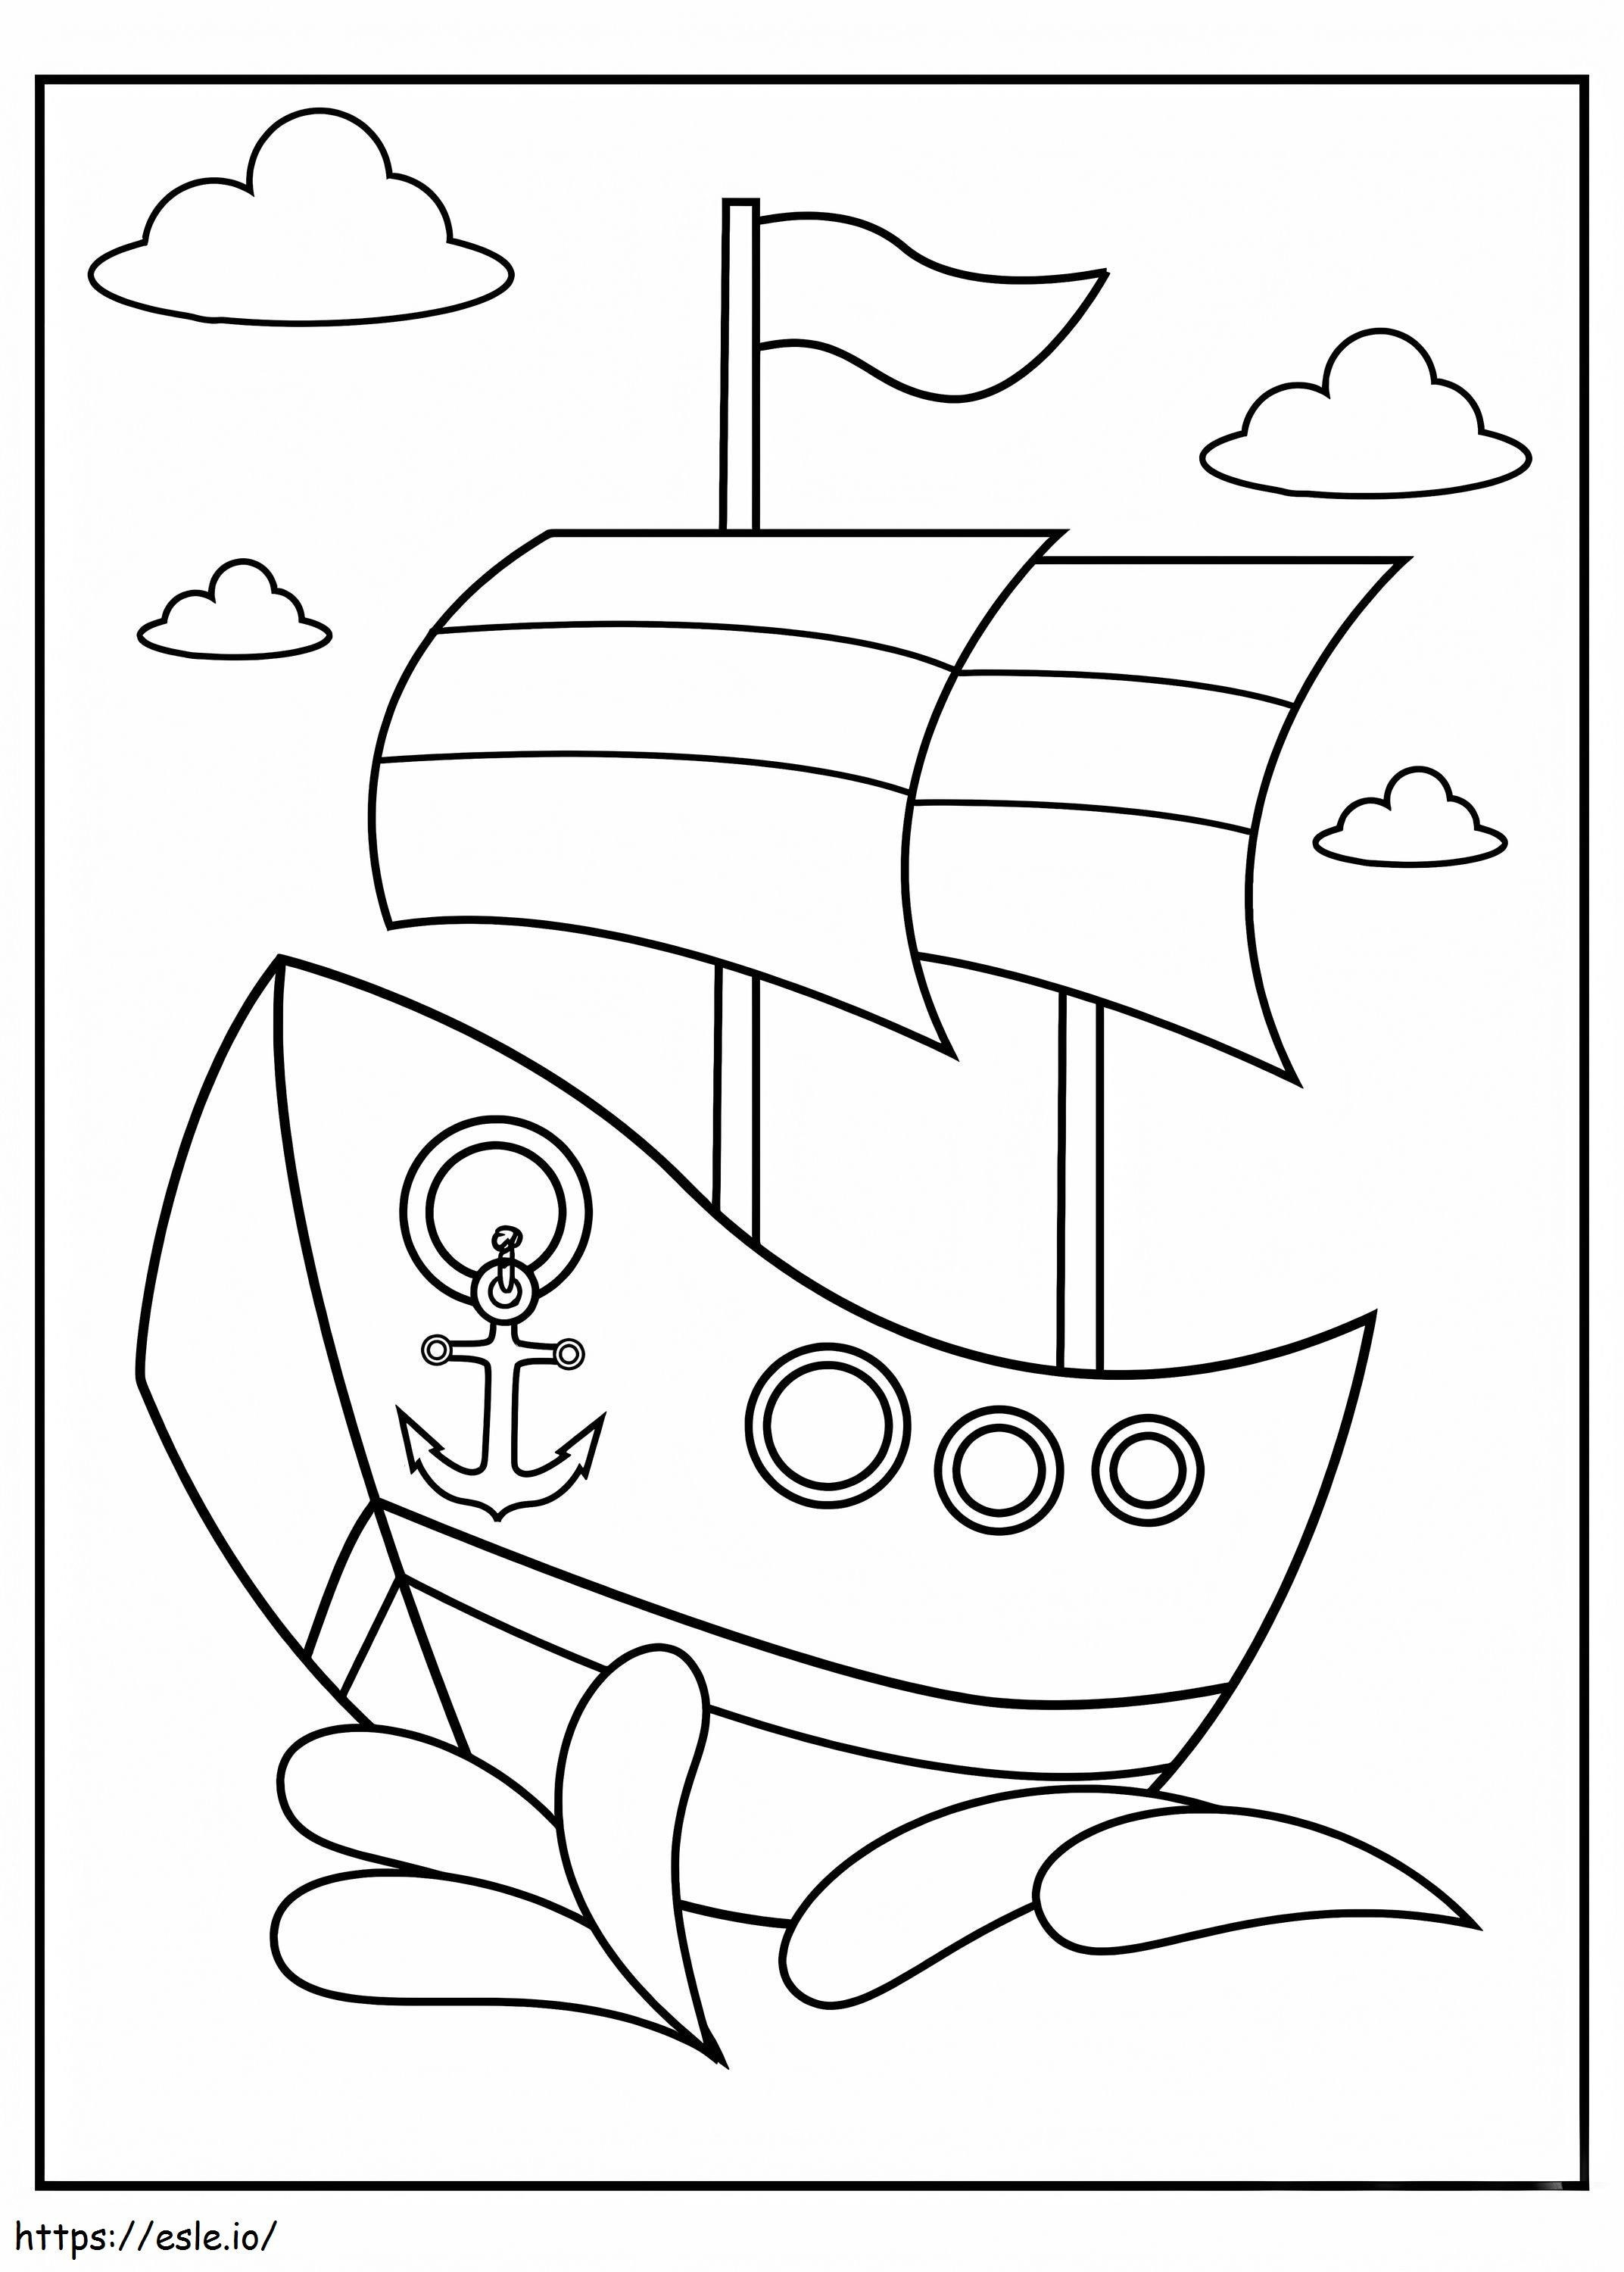 Normal Ship coloring page